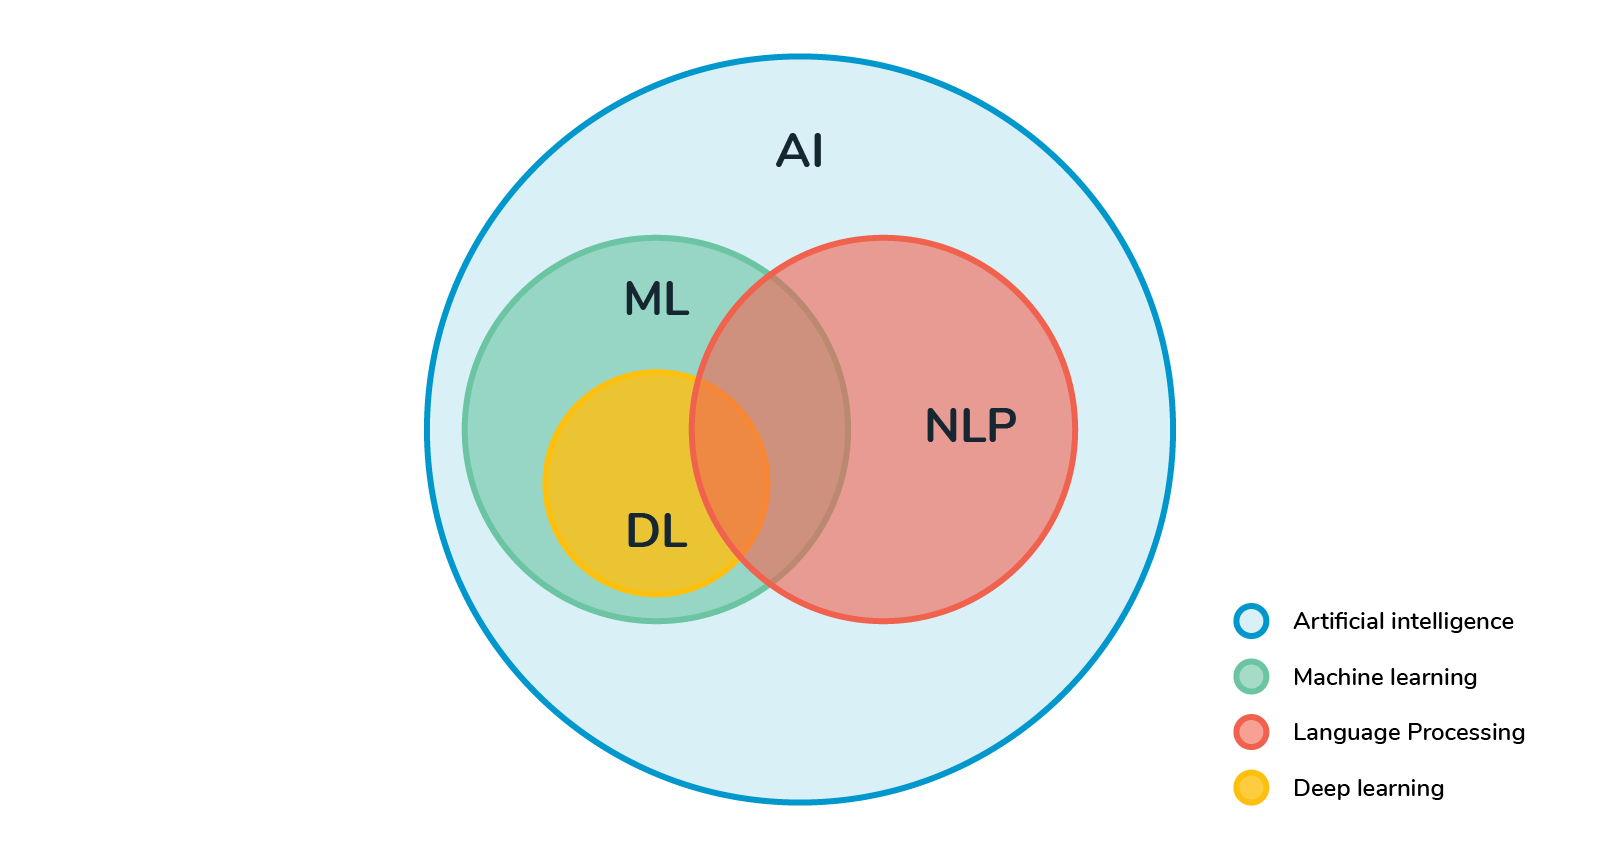 Comparison of AI, ML, NLP, and DL